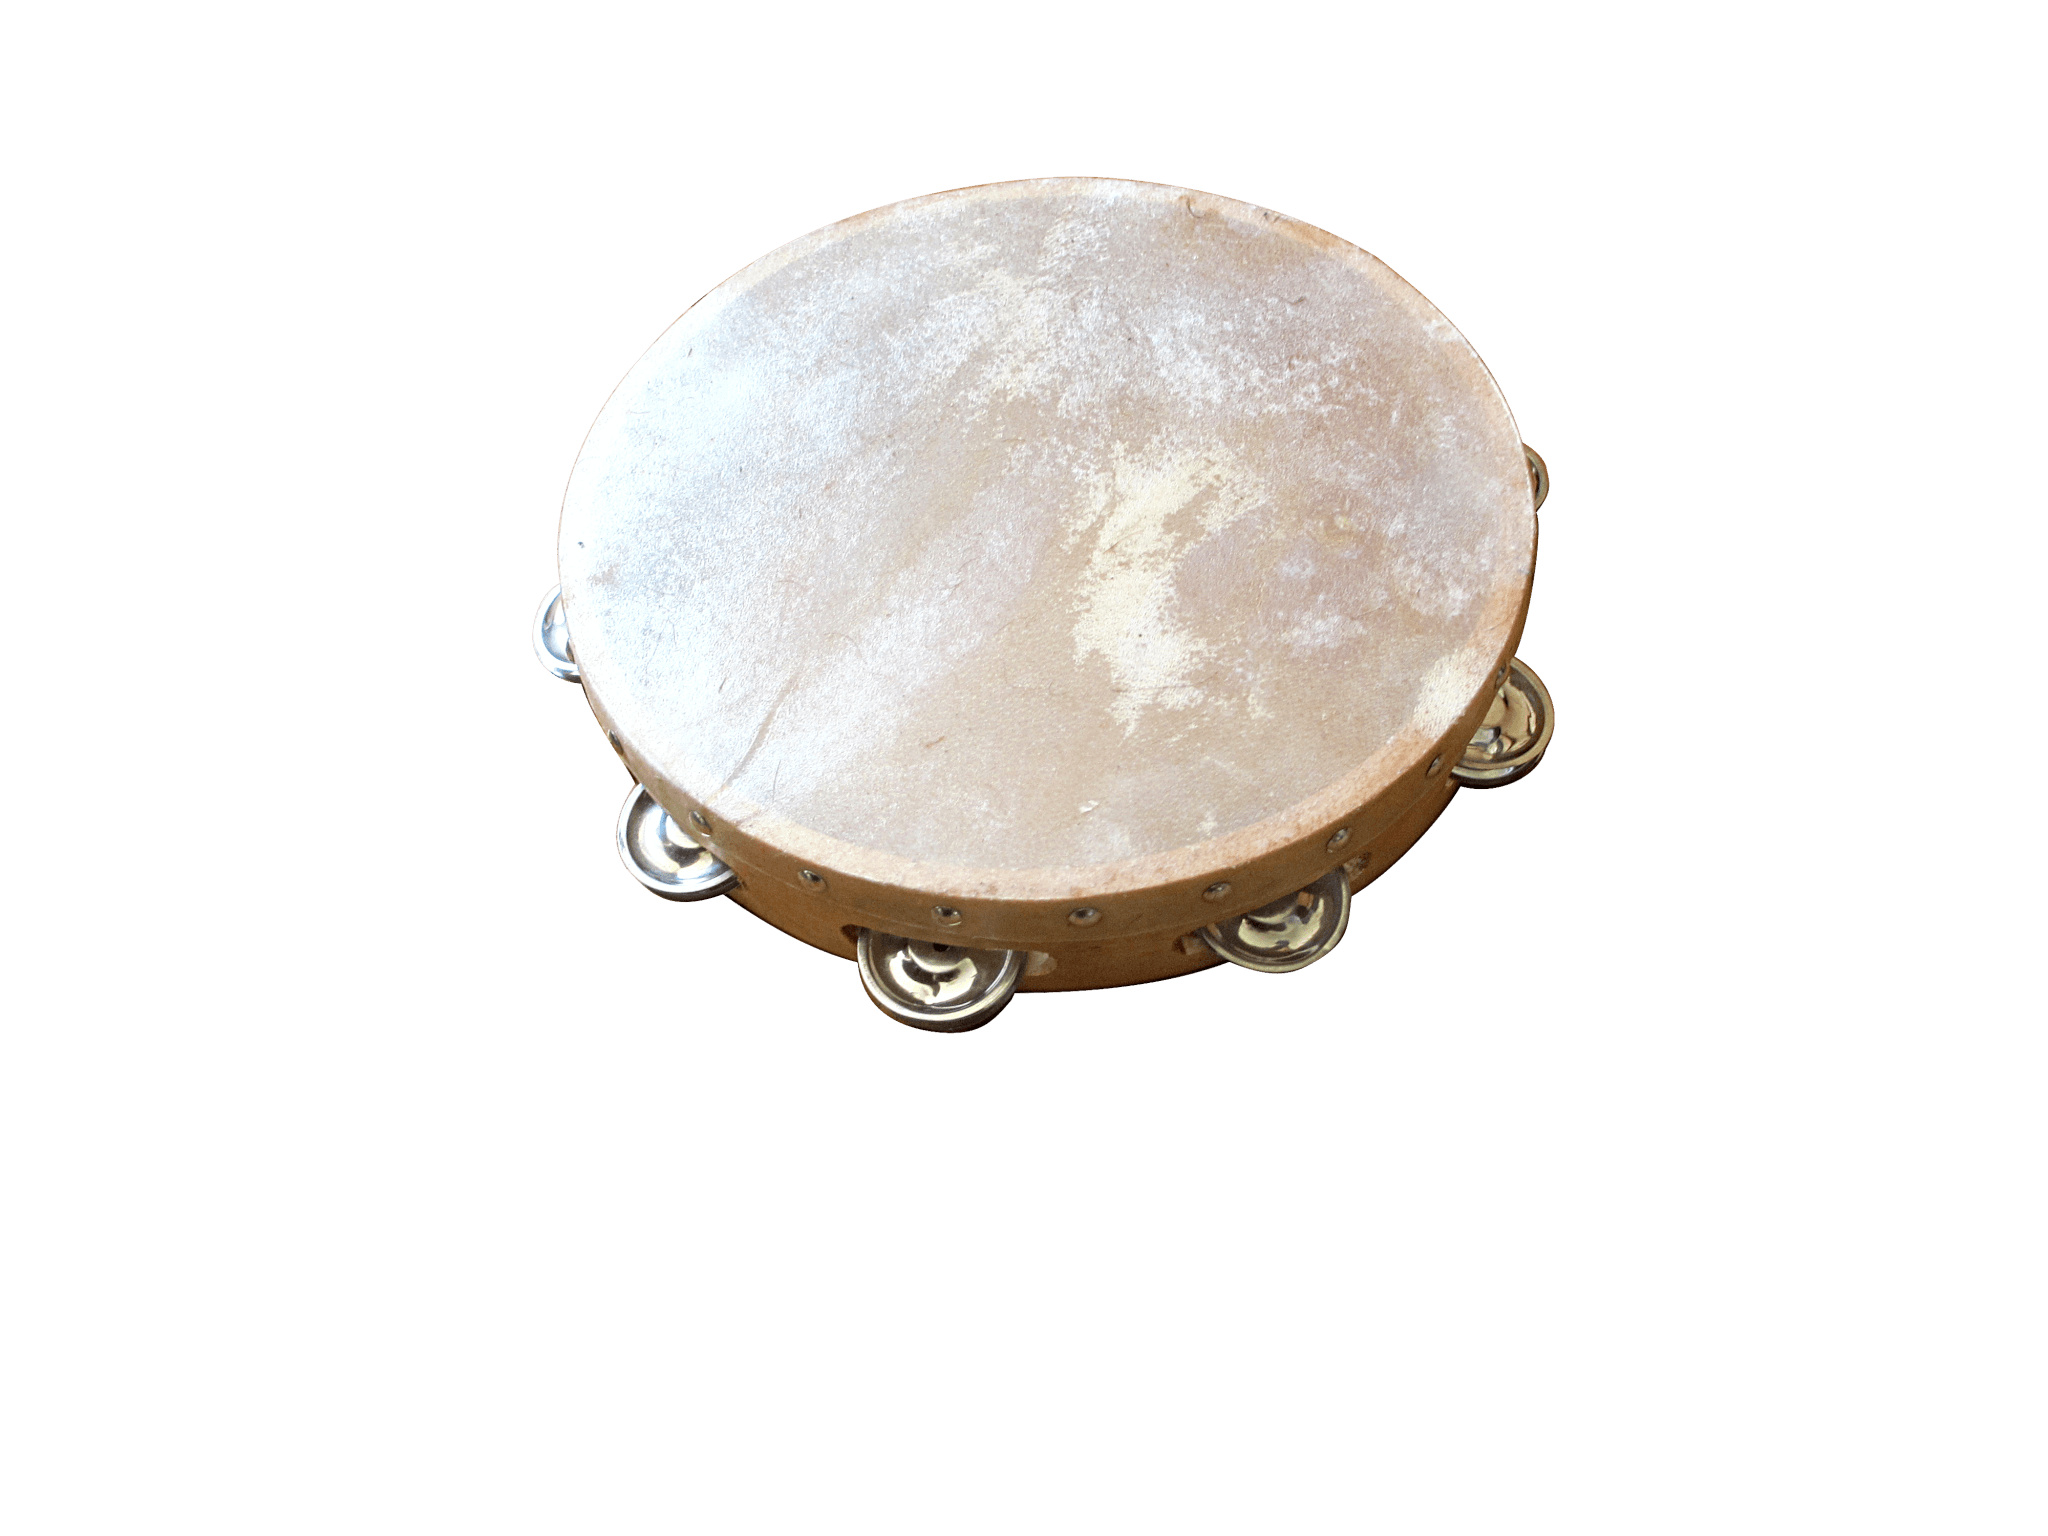 Tambourine: Goat Skin DrumHead, Attached With Metal Rivets, Membranophone. 2050x1540 HD Wallpaper.